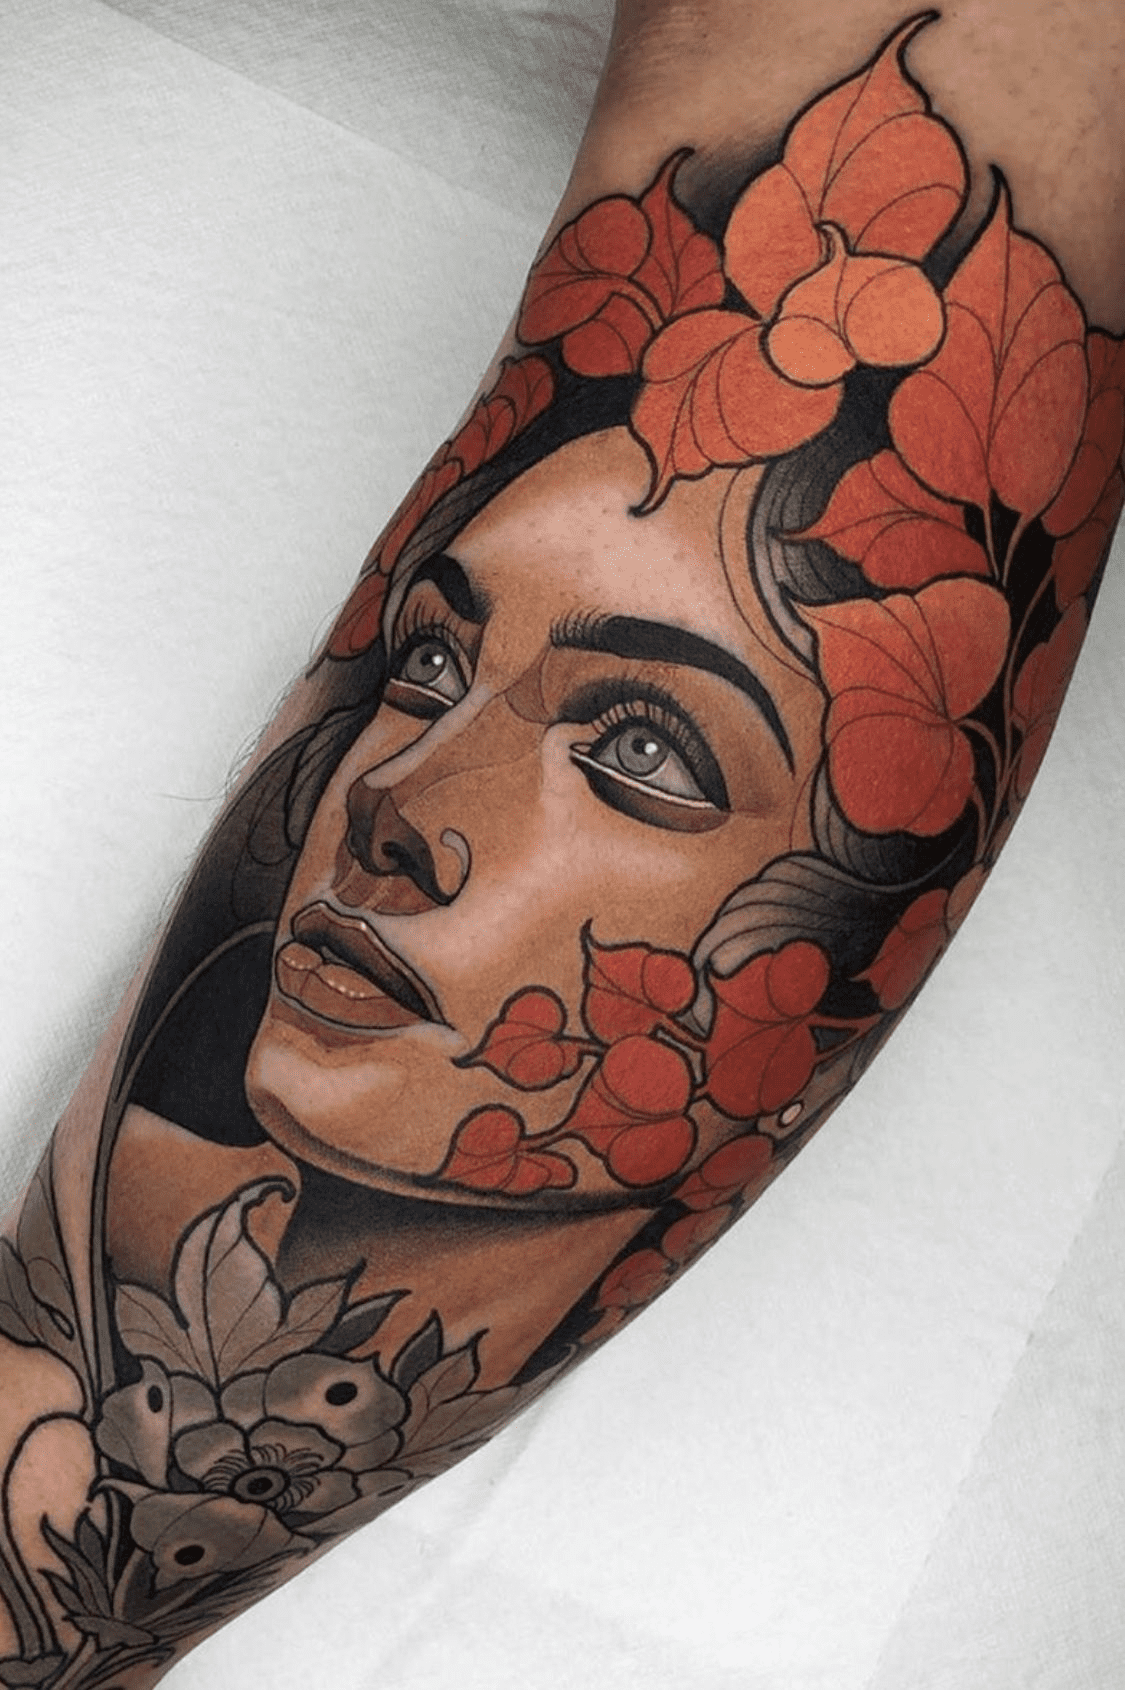 Be Unique: 50+ Neo-Traditional Tattoo Ideas For Men & Women